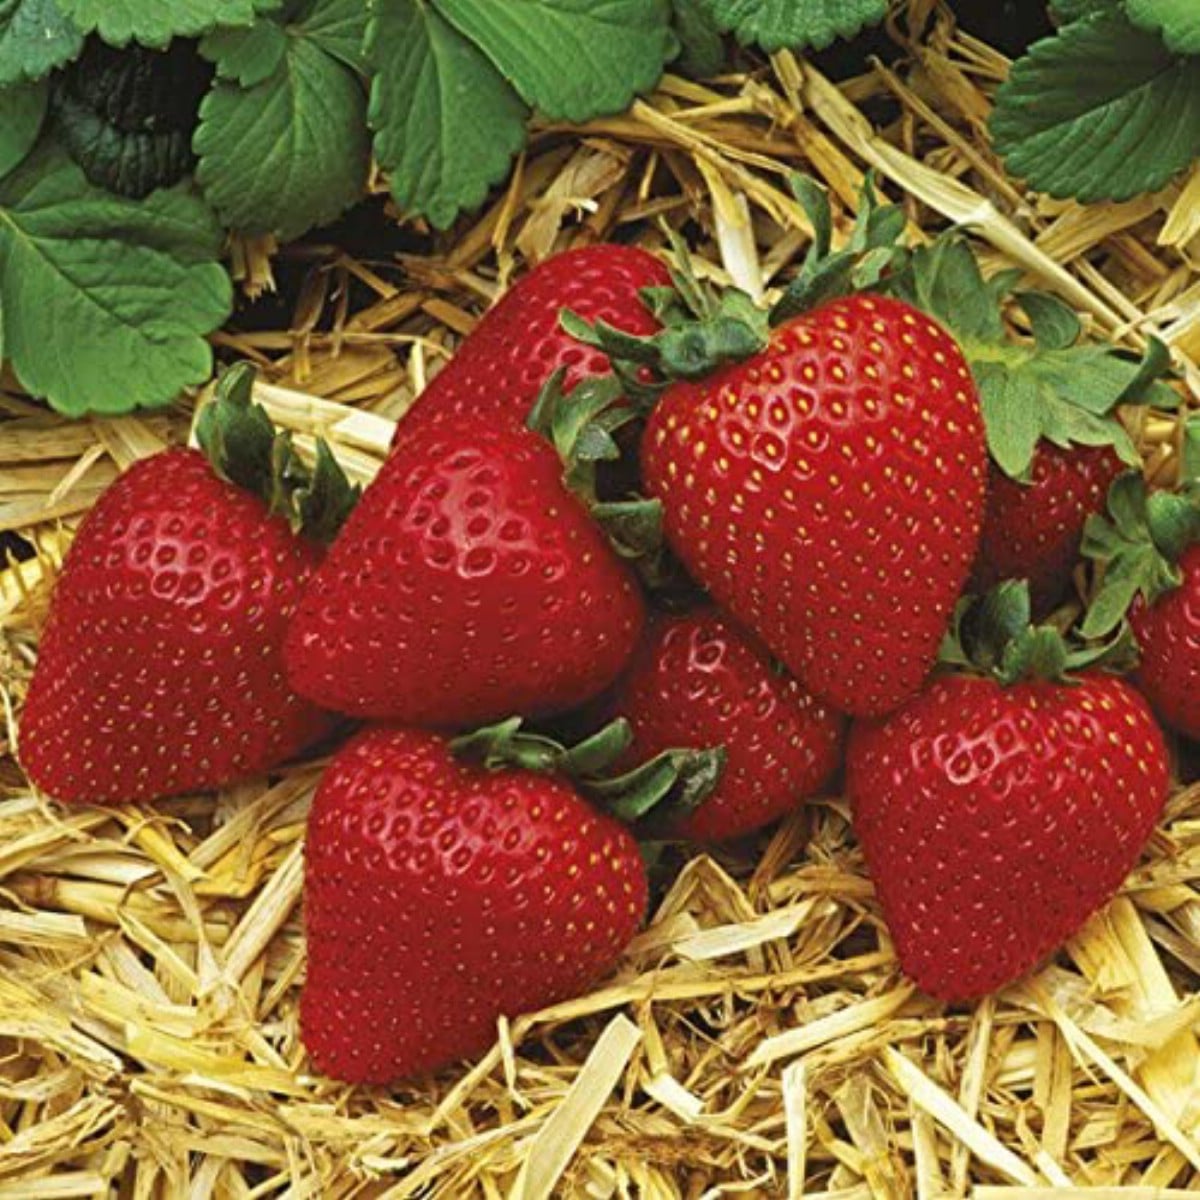 Harvested Albion strawberries in front of strawberry plants.